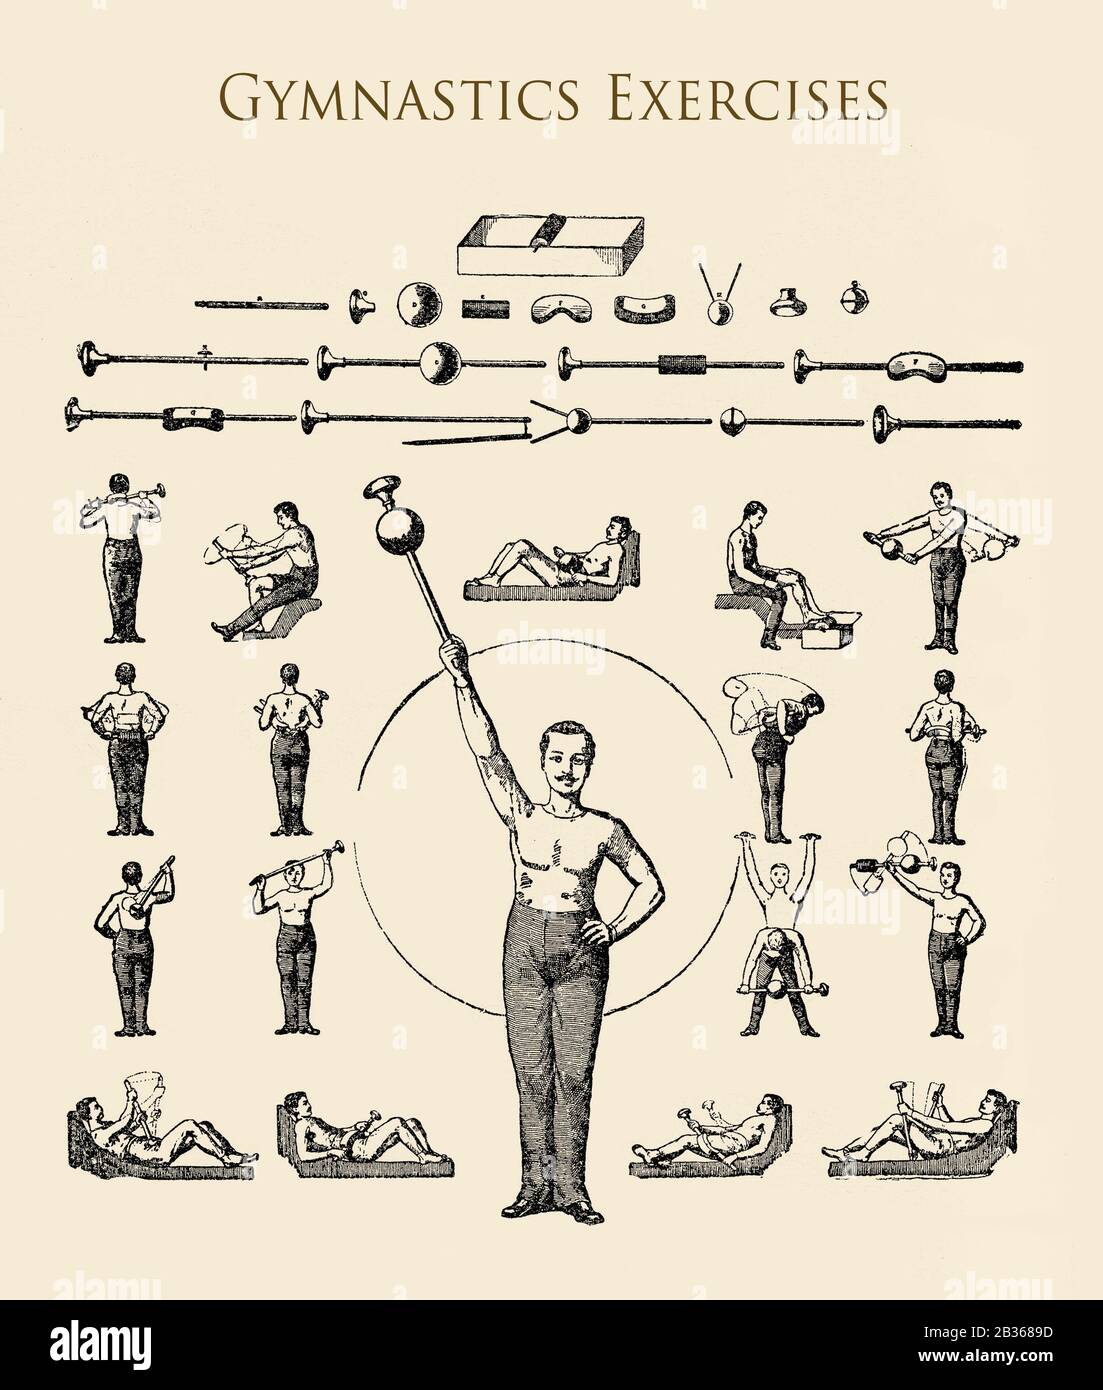 Healthcare and medicine: gymnastic exercises with gears and equipment, illustrated table 19th century Stock Photo